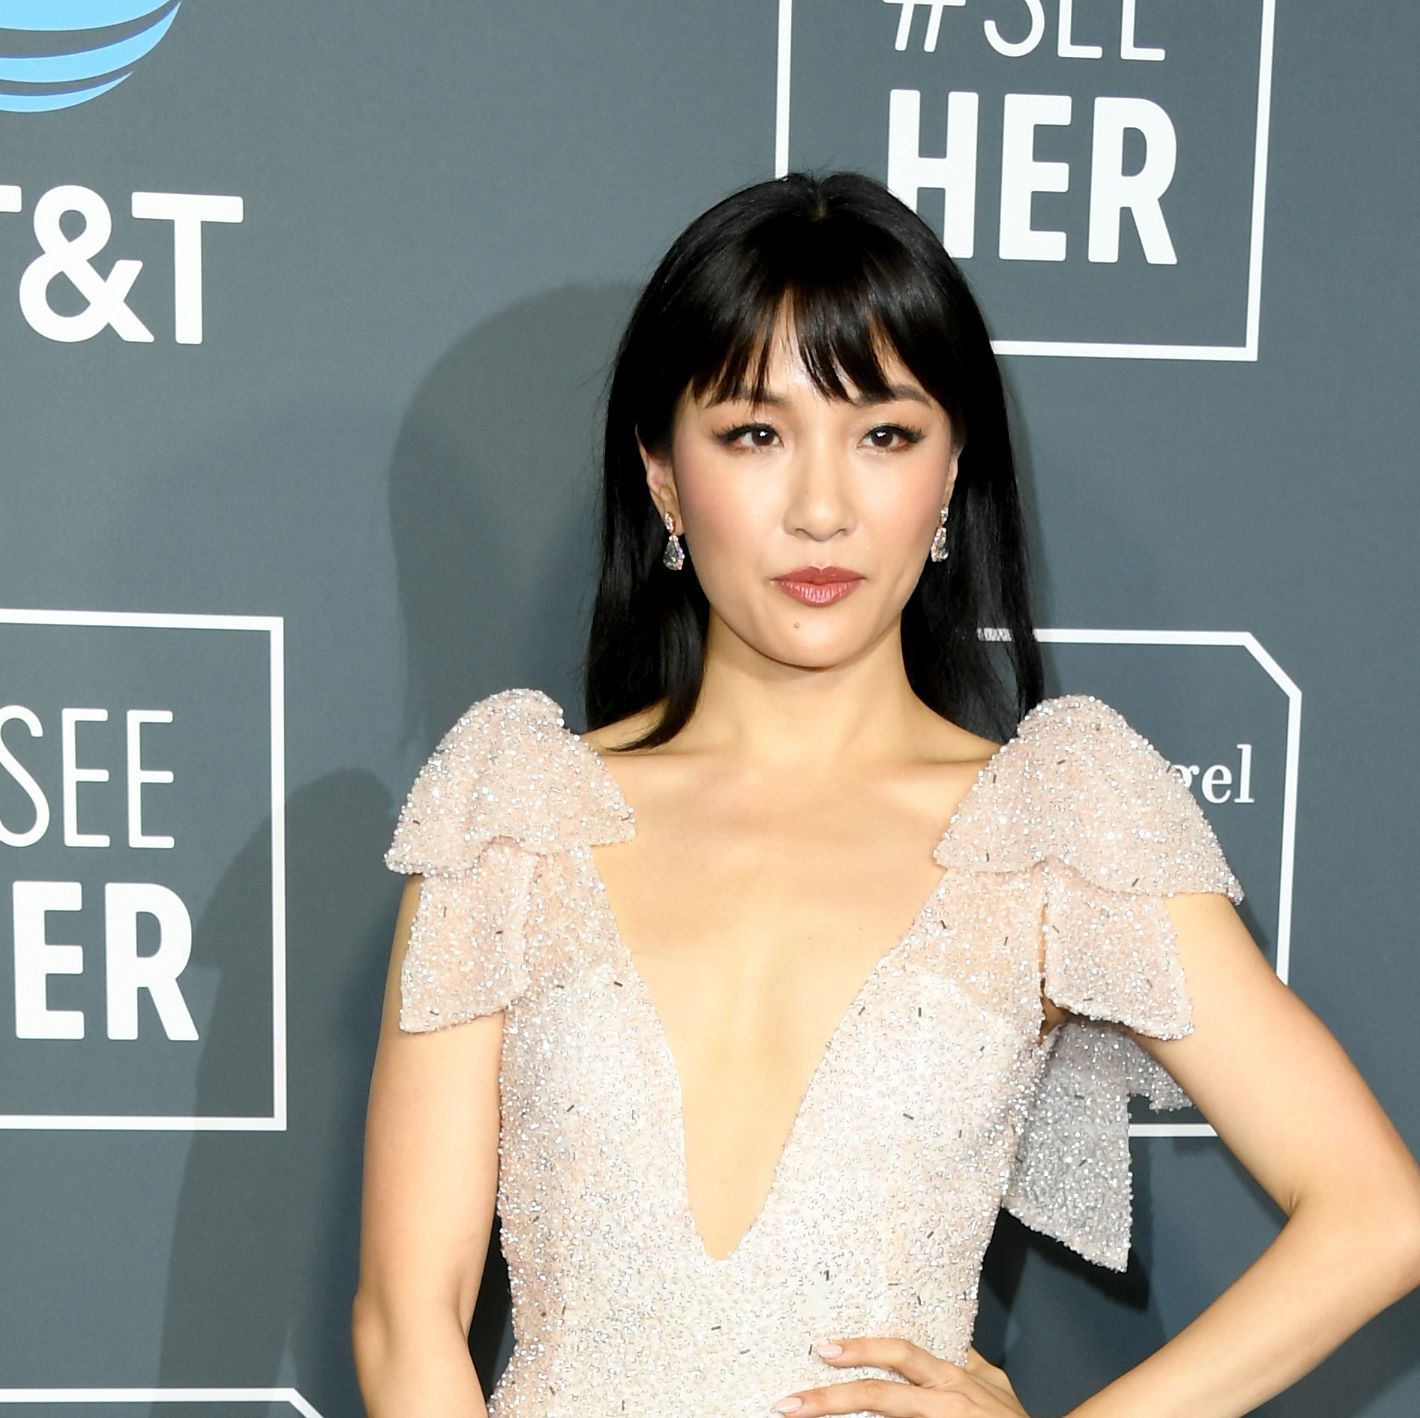 Constance Wu Reveals She Attempted Suicide After ‘Fresh Off the Boat’ Tweet Backlash in an Emotional Message